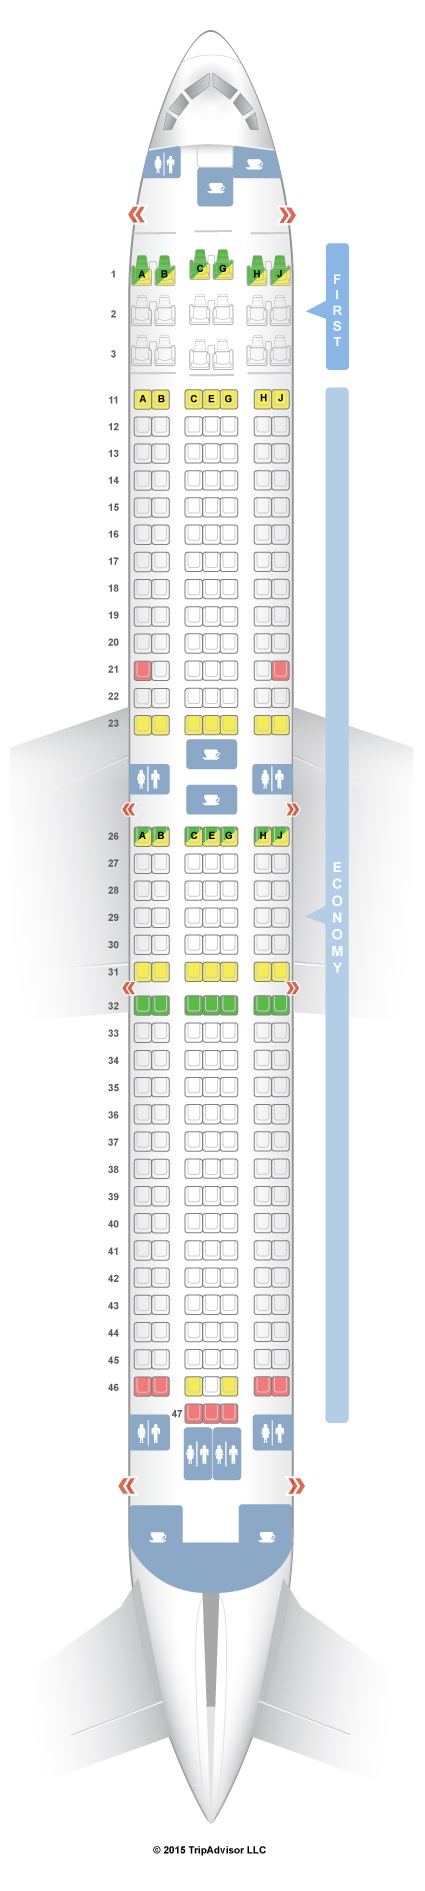 hawaiian airlines no seat assignment